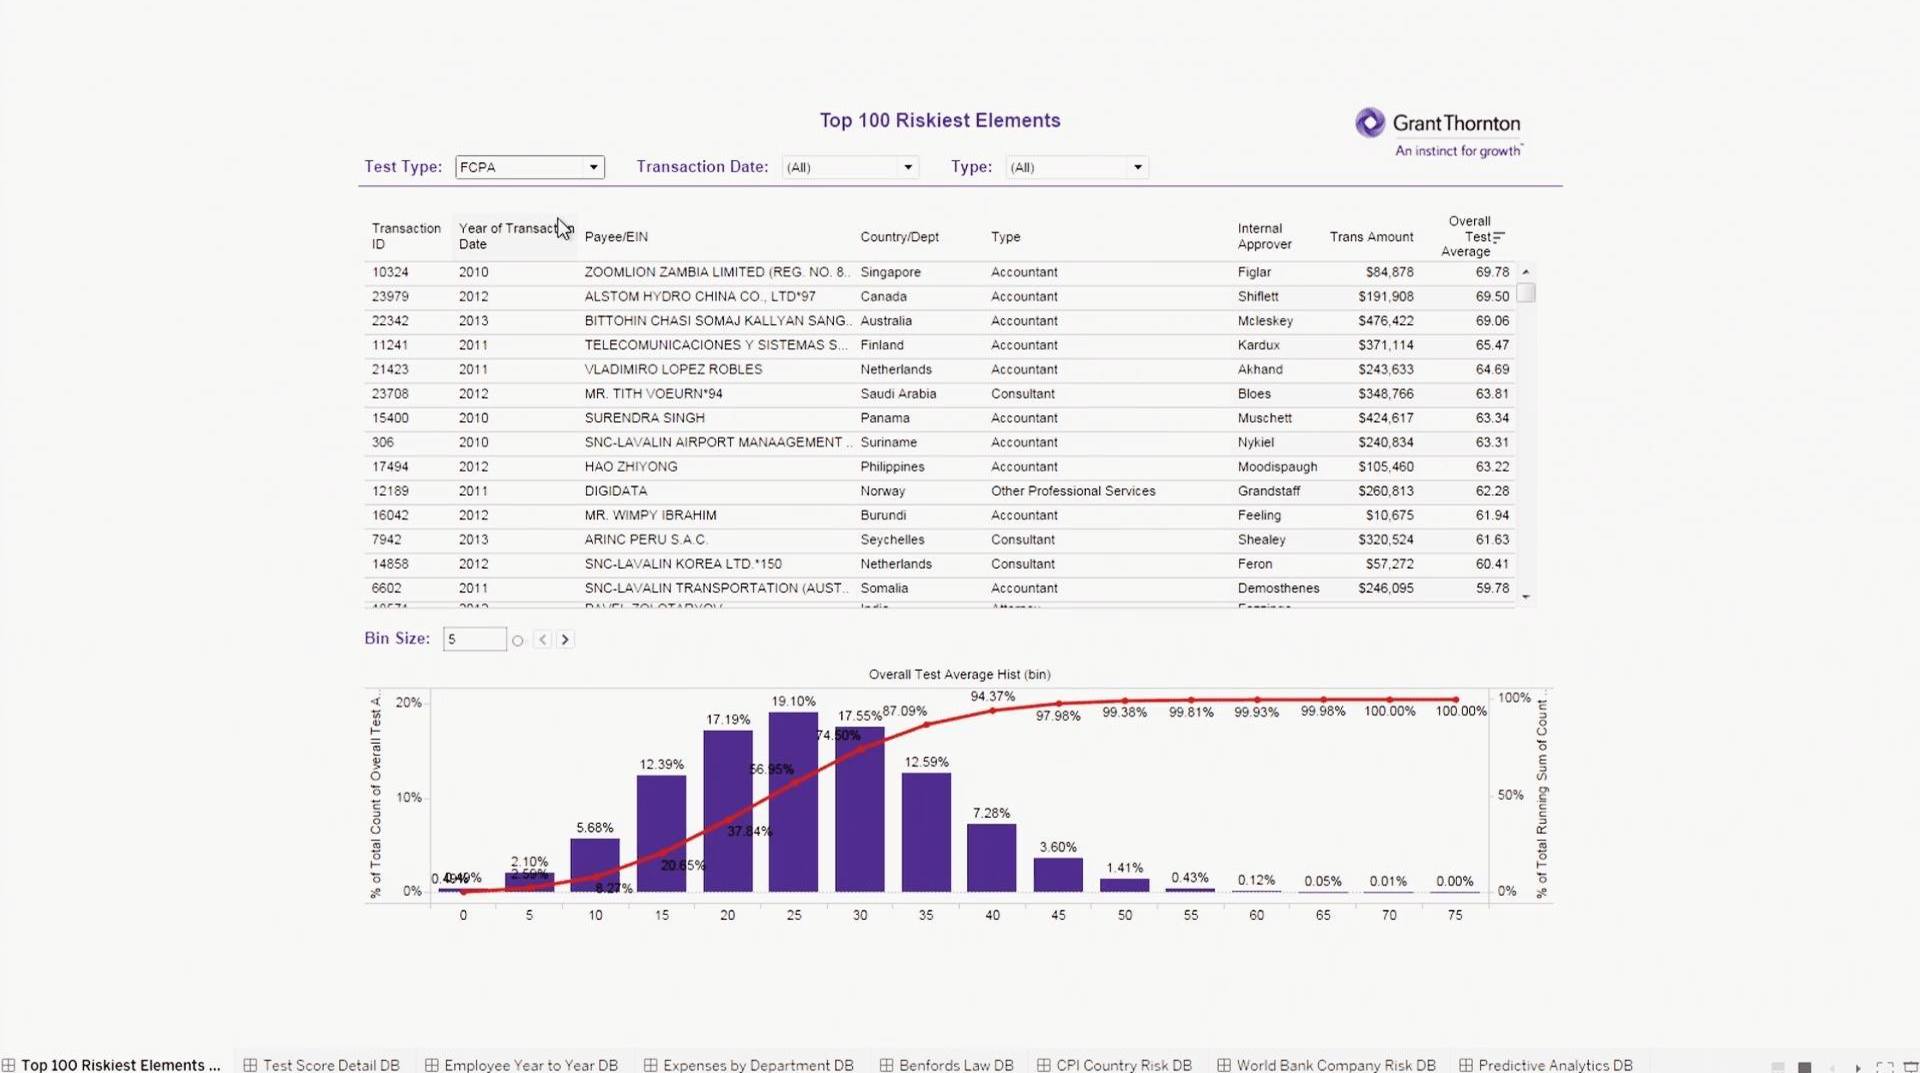 Grant Thornton detects risk, fraud, and waste with Tableau に移動